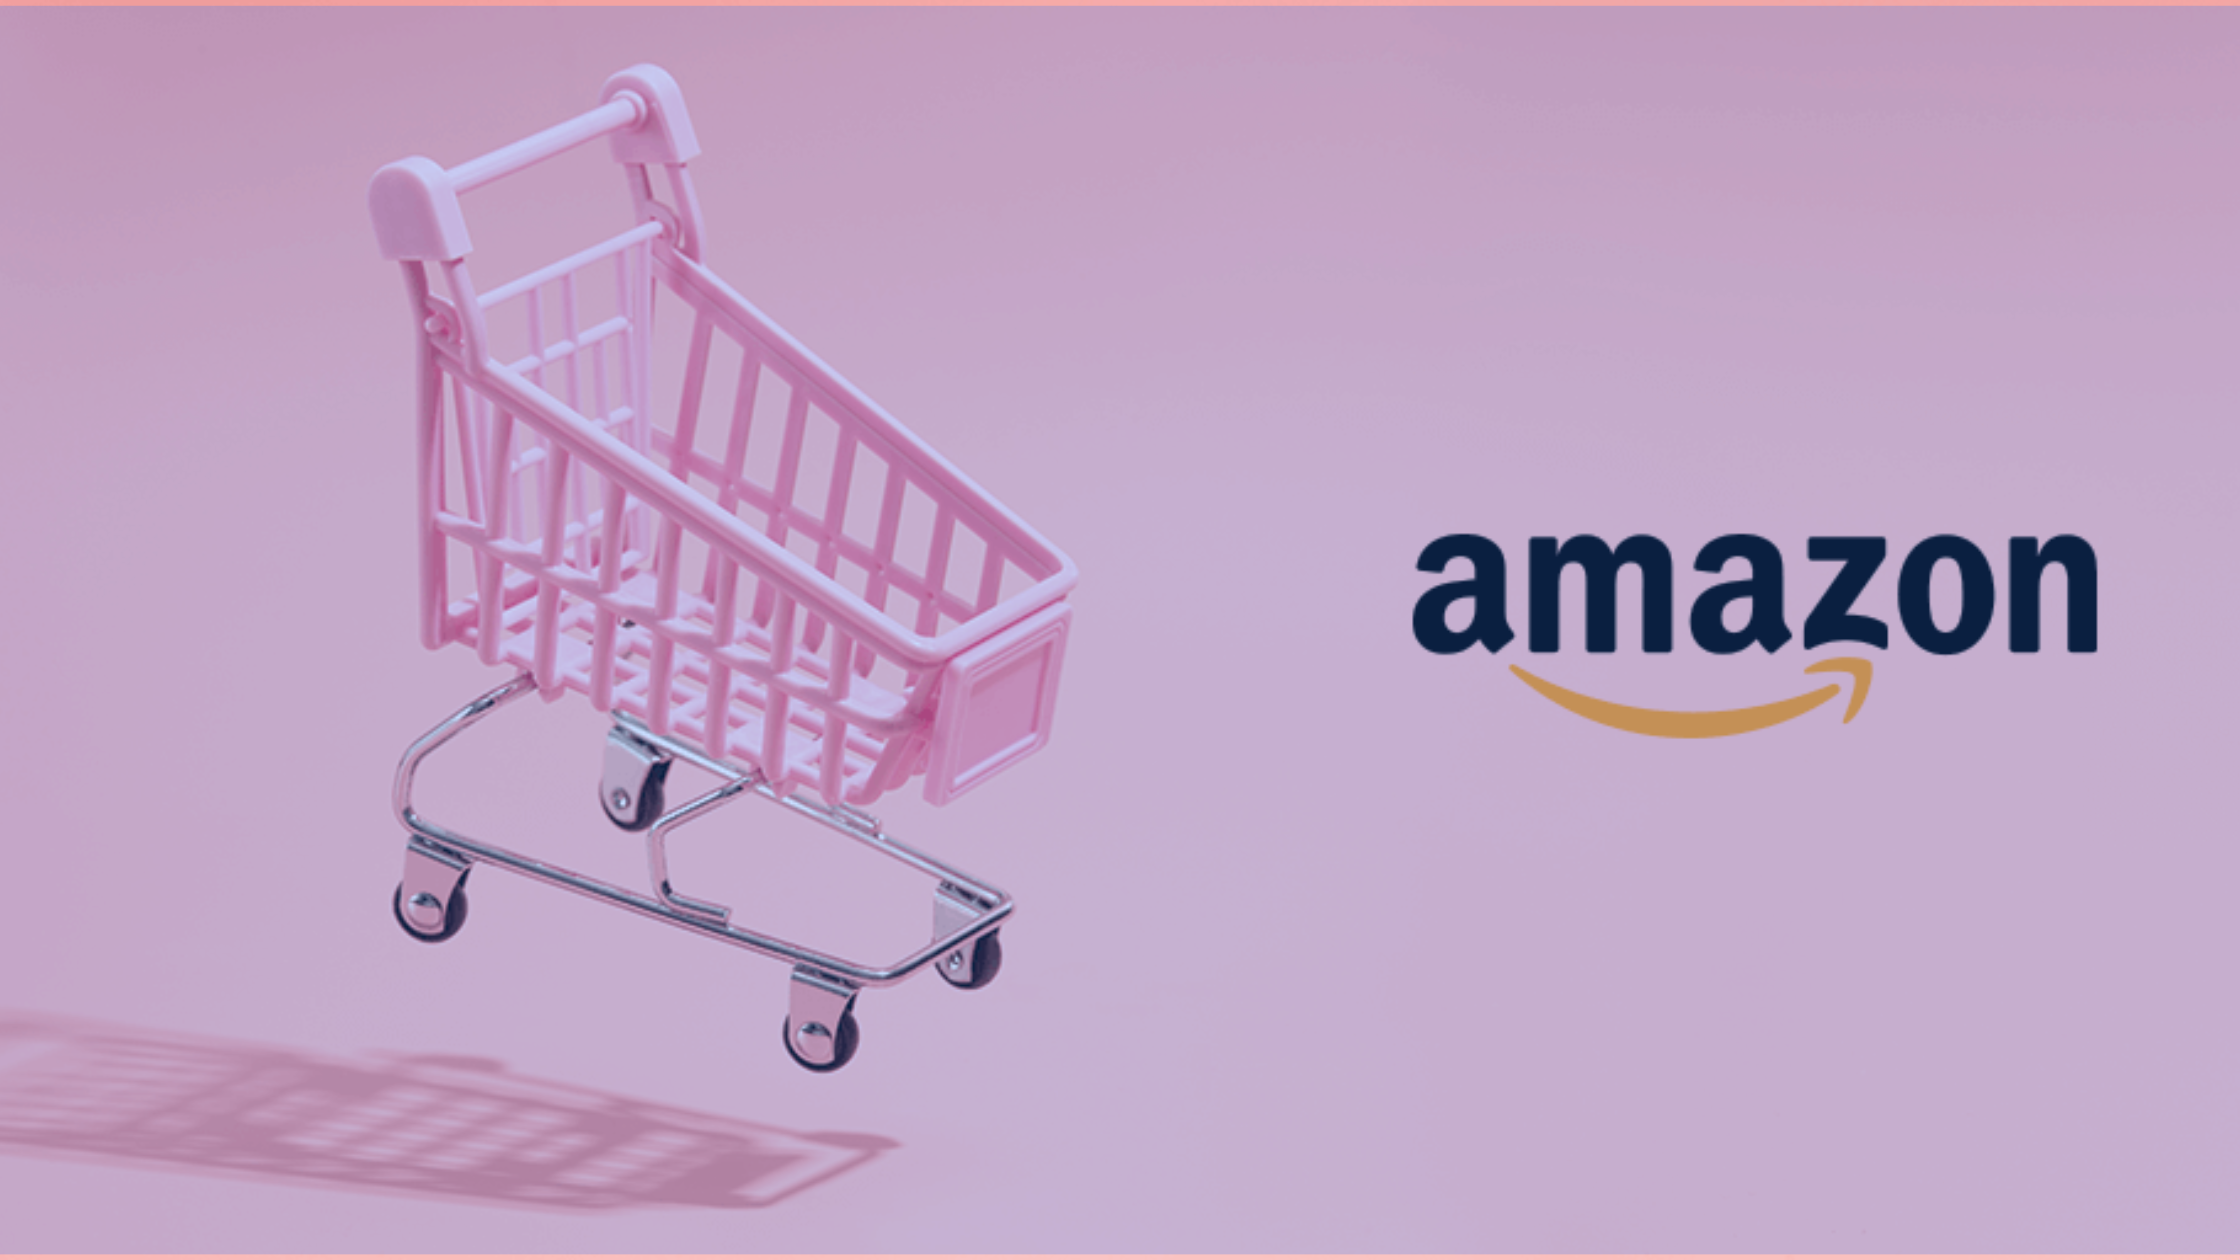 Amazon brand and a shopping cart | Finch